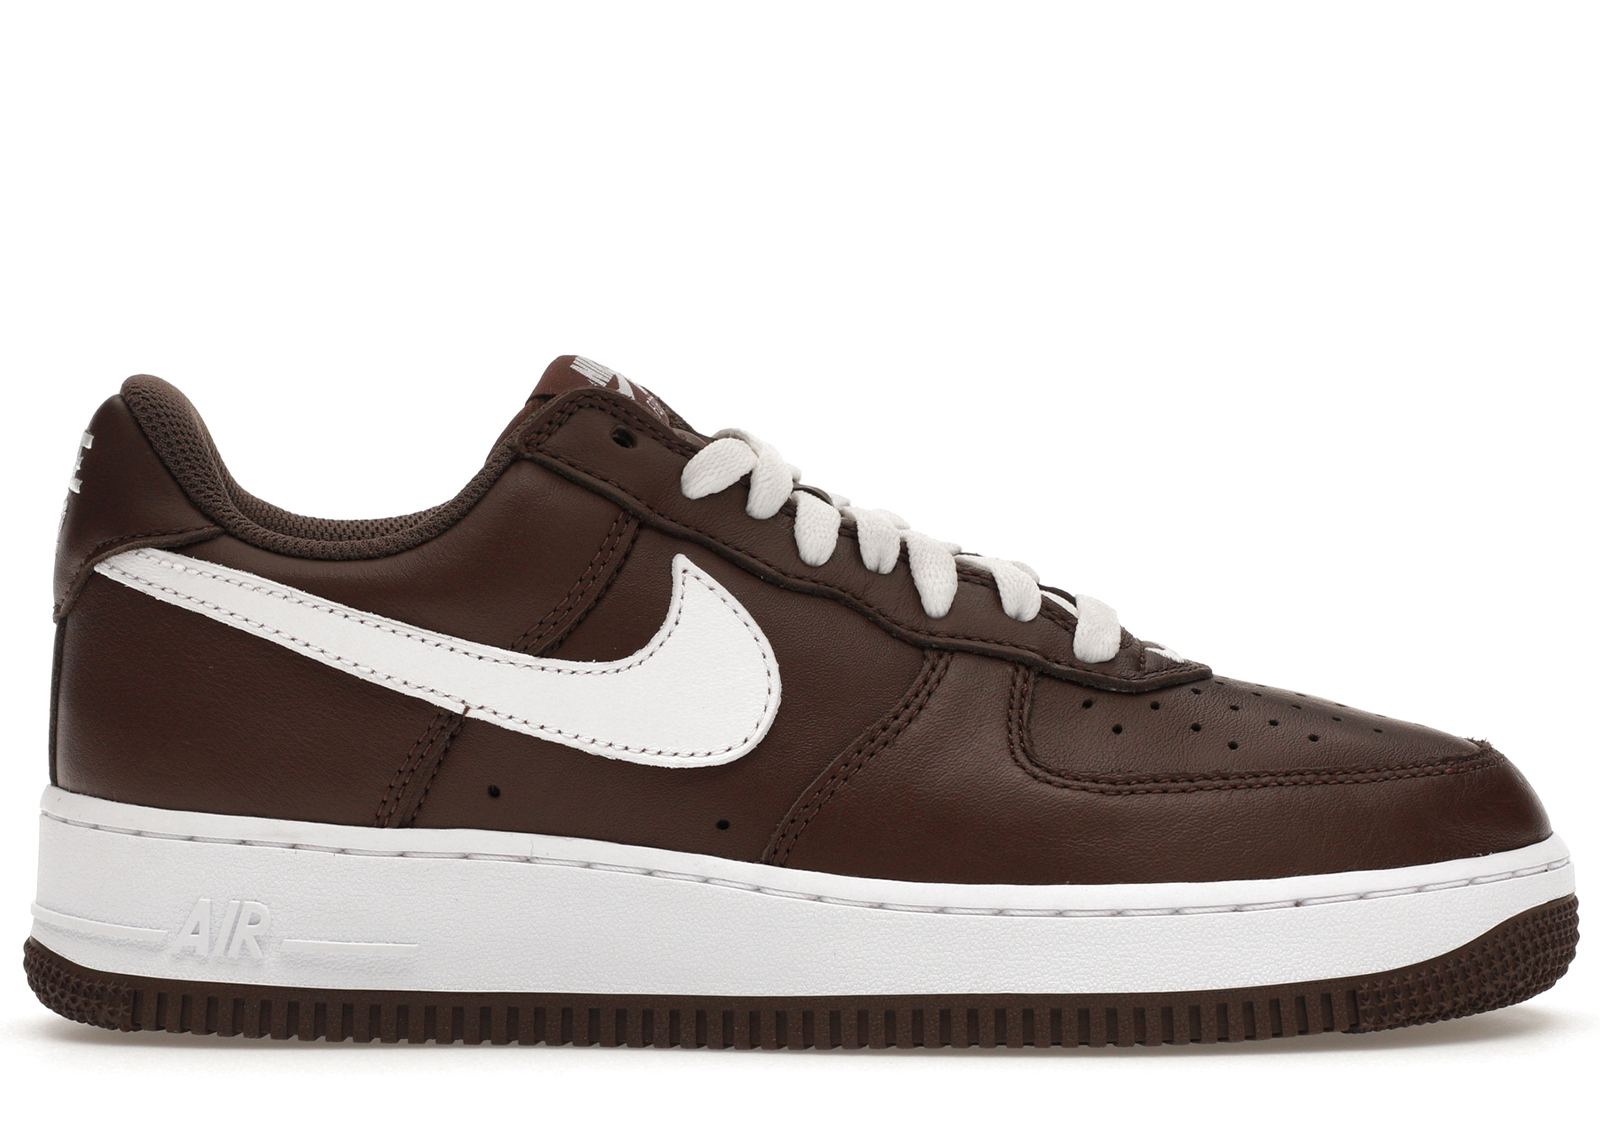 Nike Air Force 1 Low Retro Color of the Month Chocolate Men's 